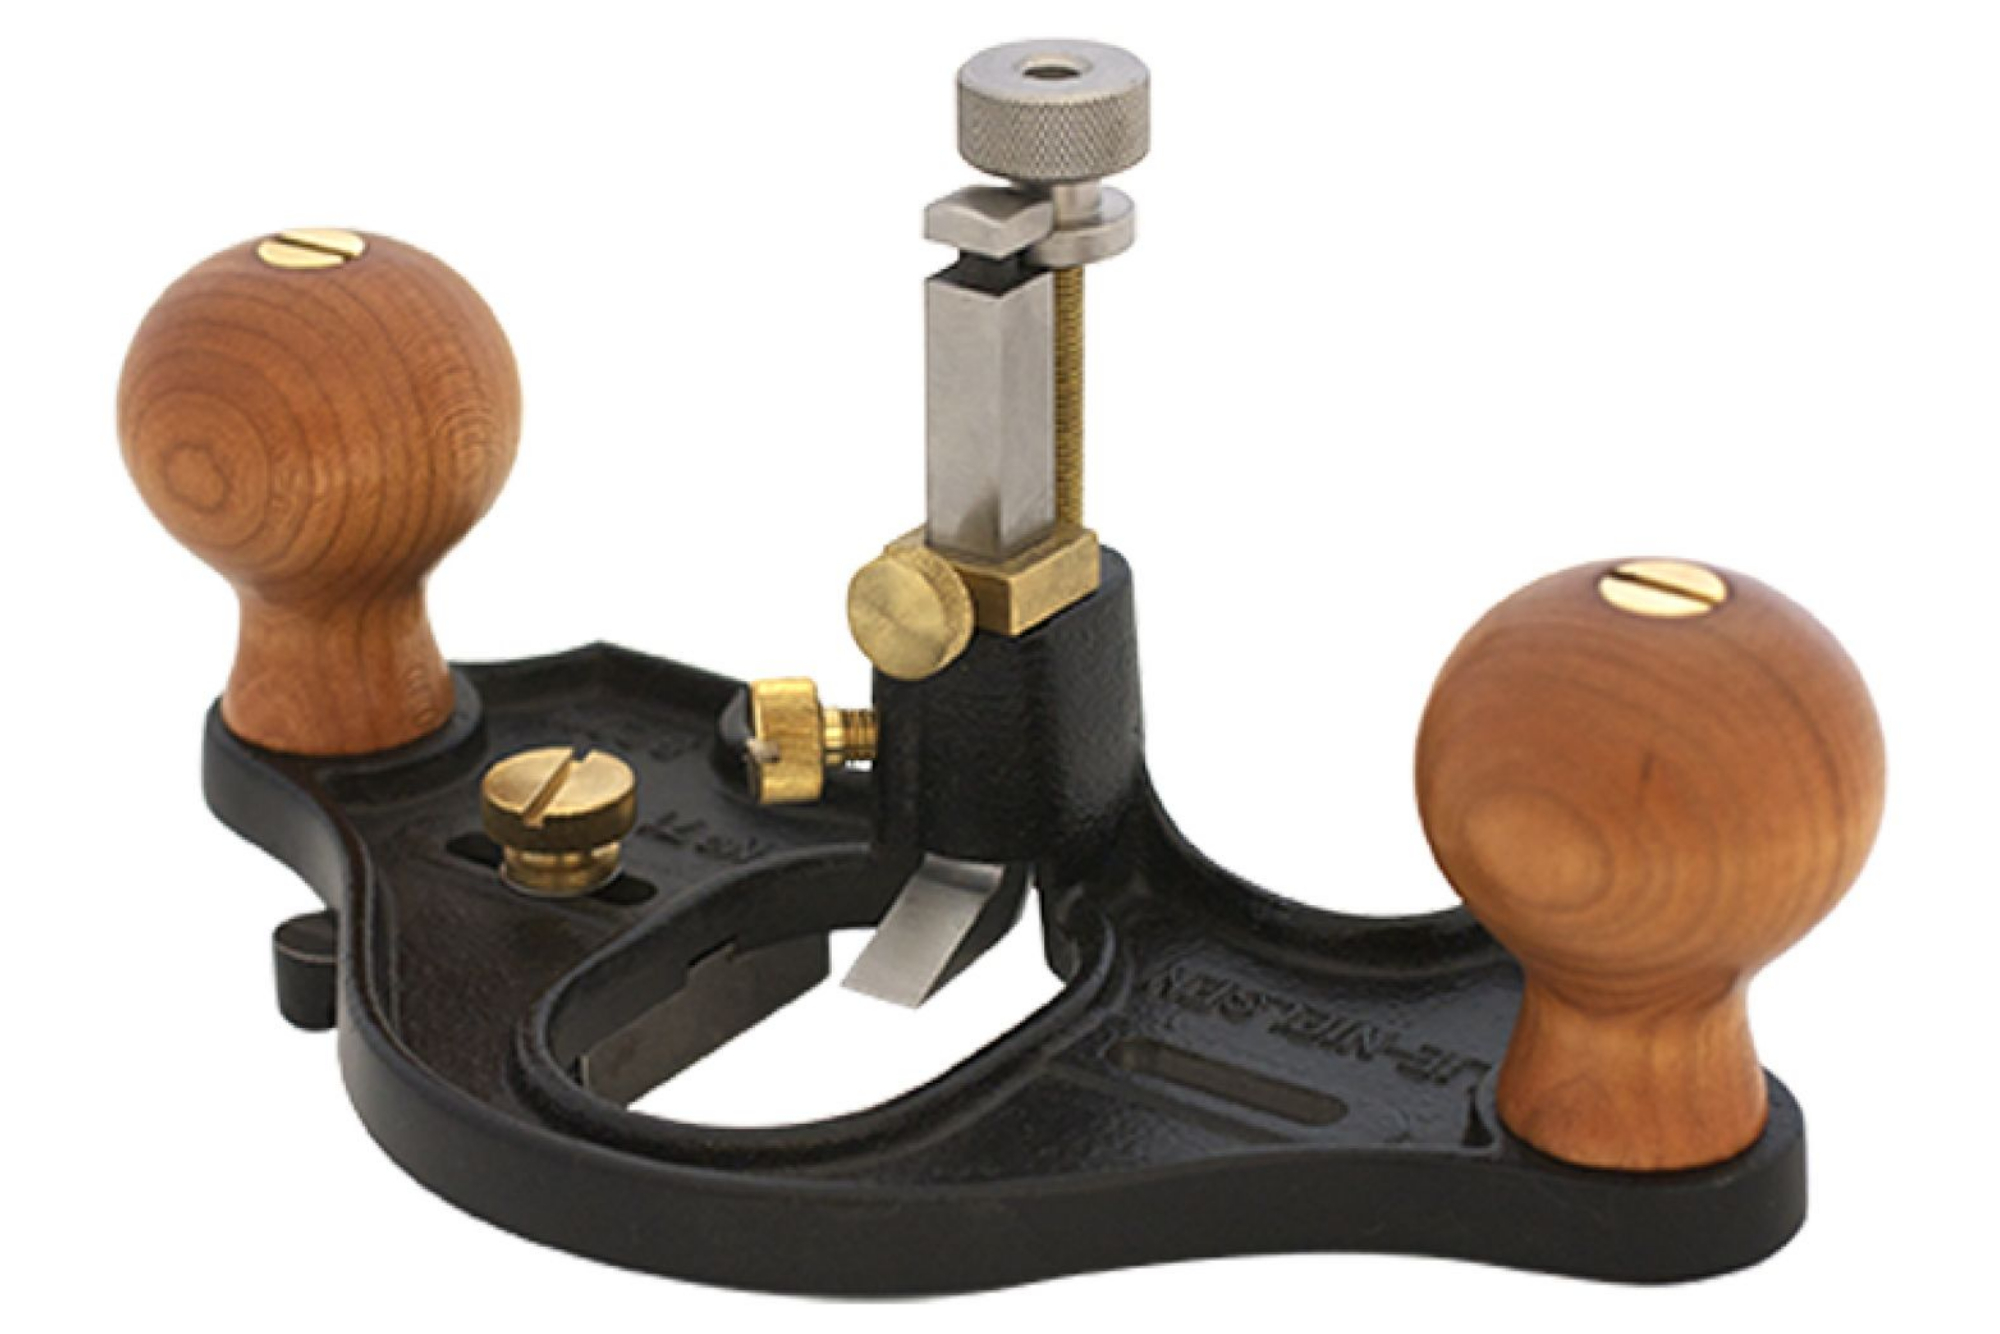 What Is A Router Plane?